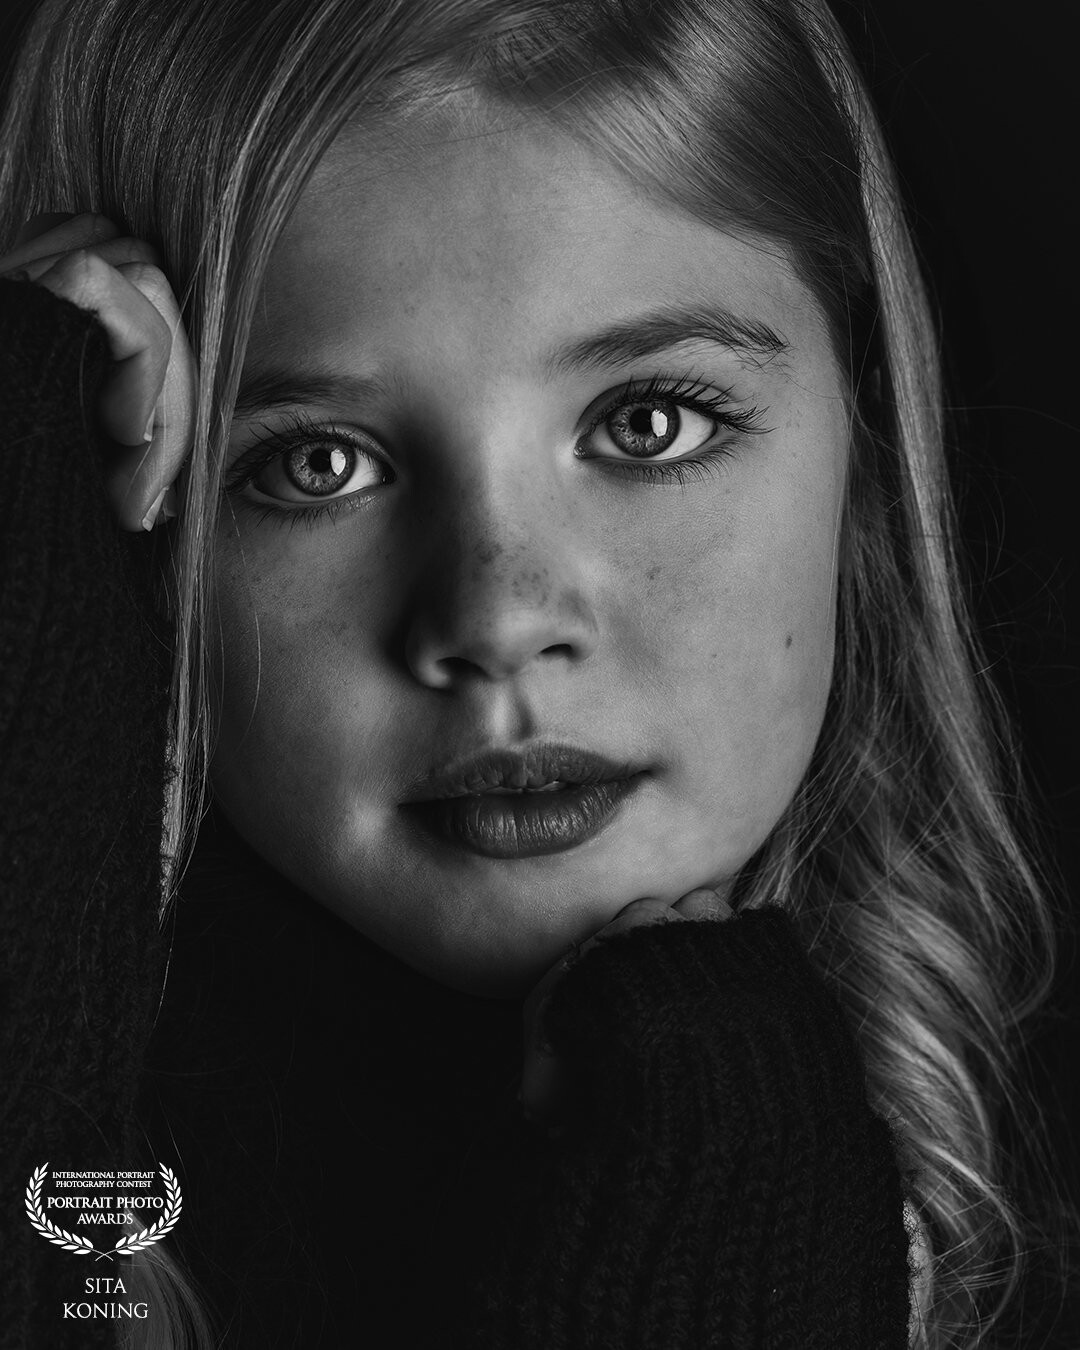 This girl comes to my photostudio every year around her birthday. She didn’t like this pose very much, still she rocks this picture with her big blue eyes..